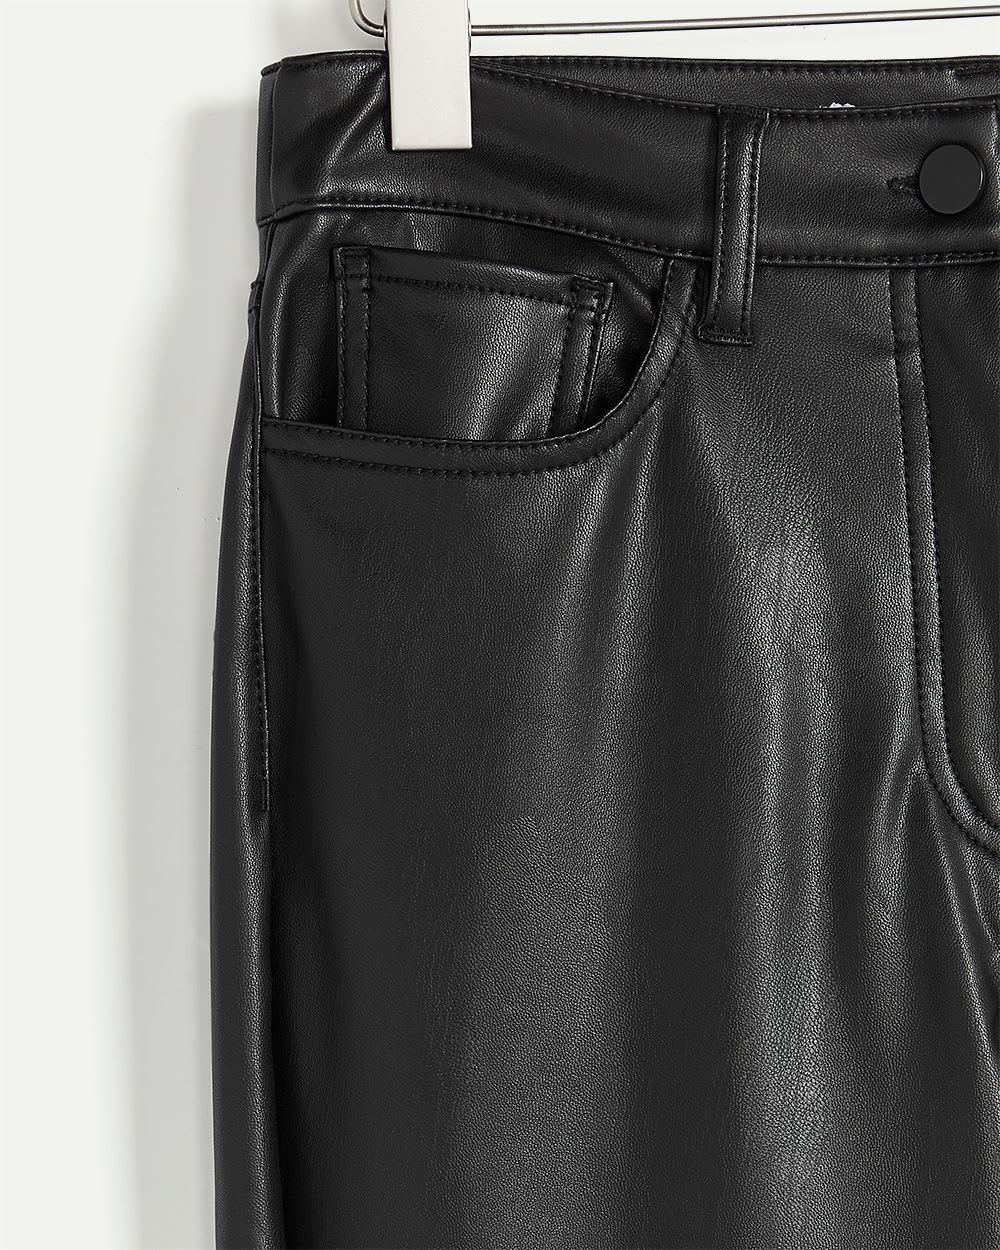 High Rise Faux Leather Straight Leg Pant - Tall